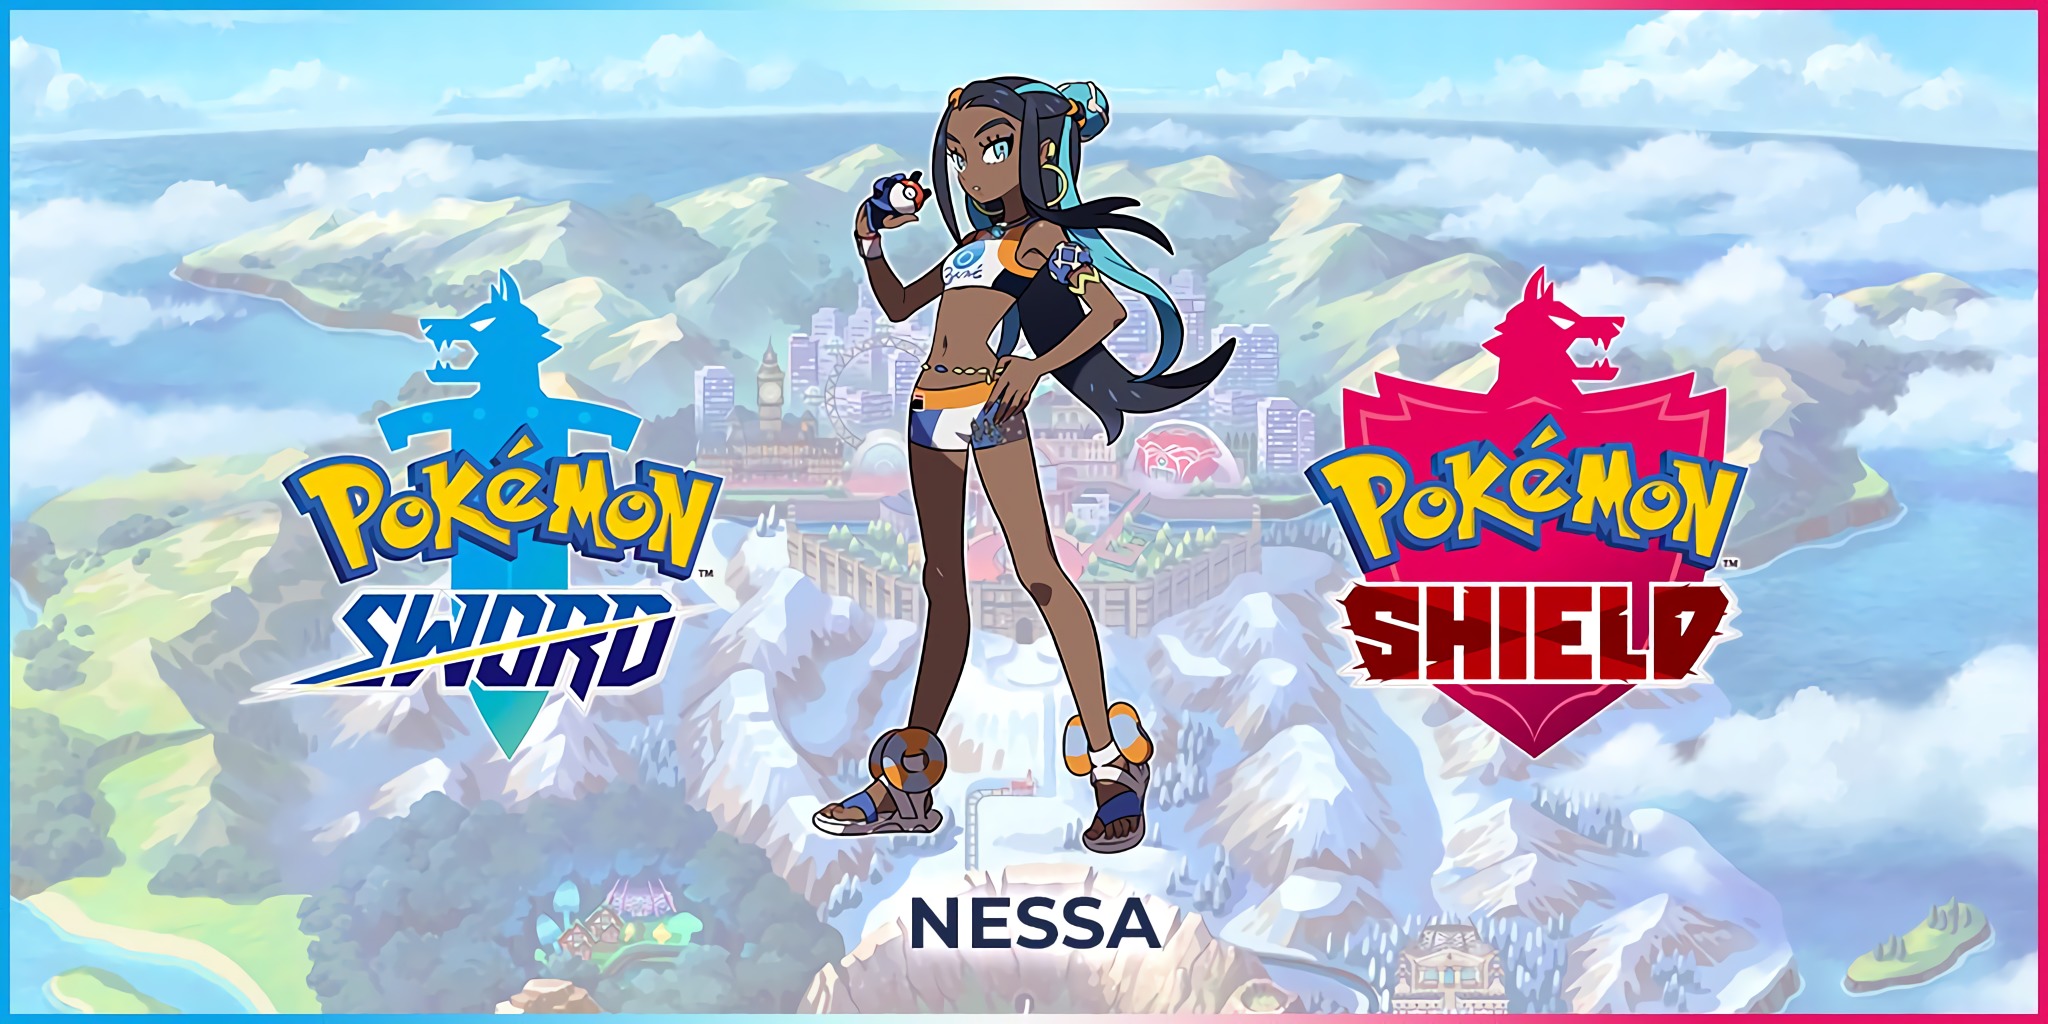 Nessa, the new Water-type Gym Leader from Pokemon Sword and Shield is already making a splash